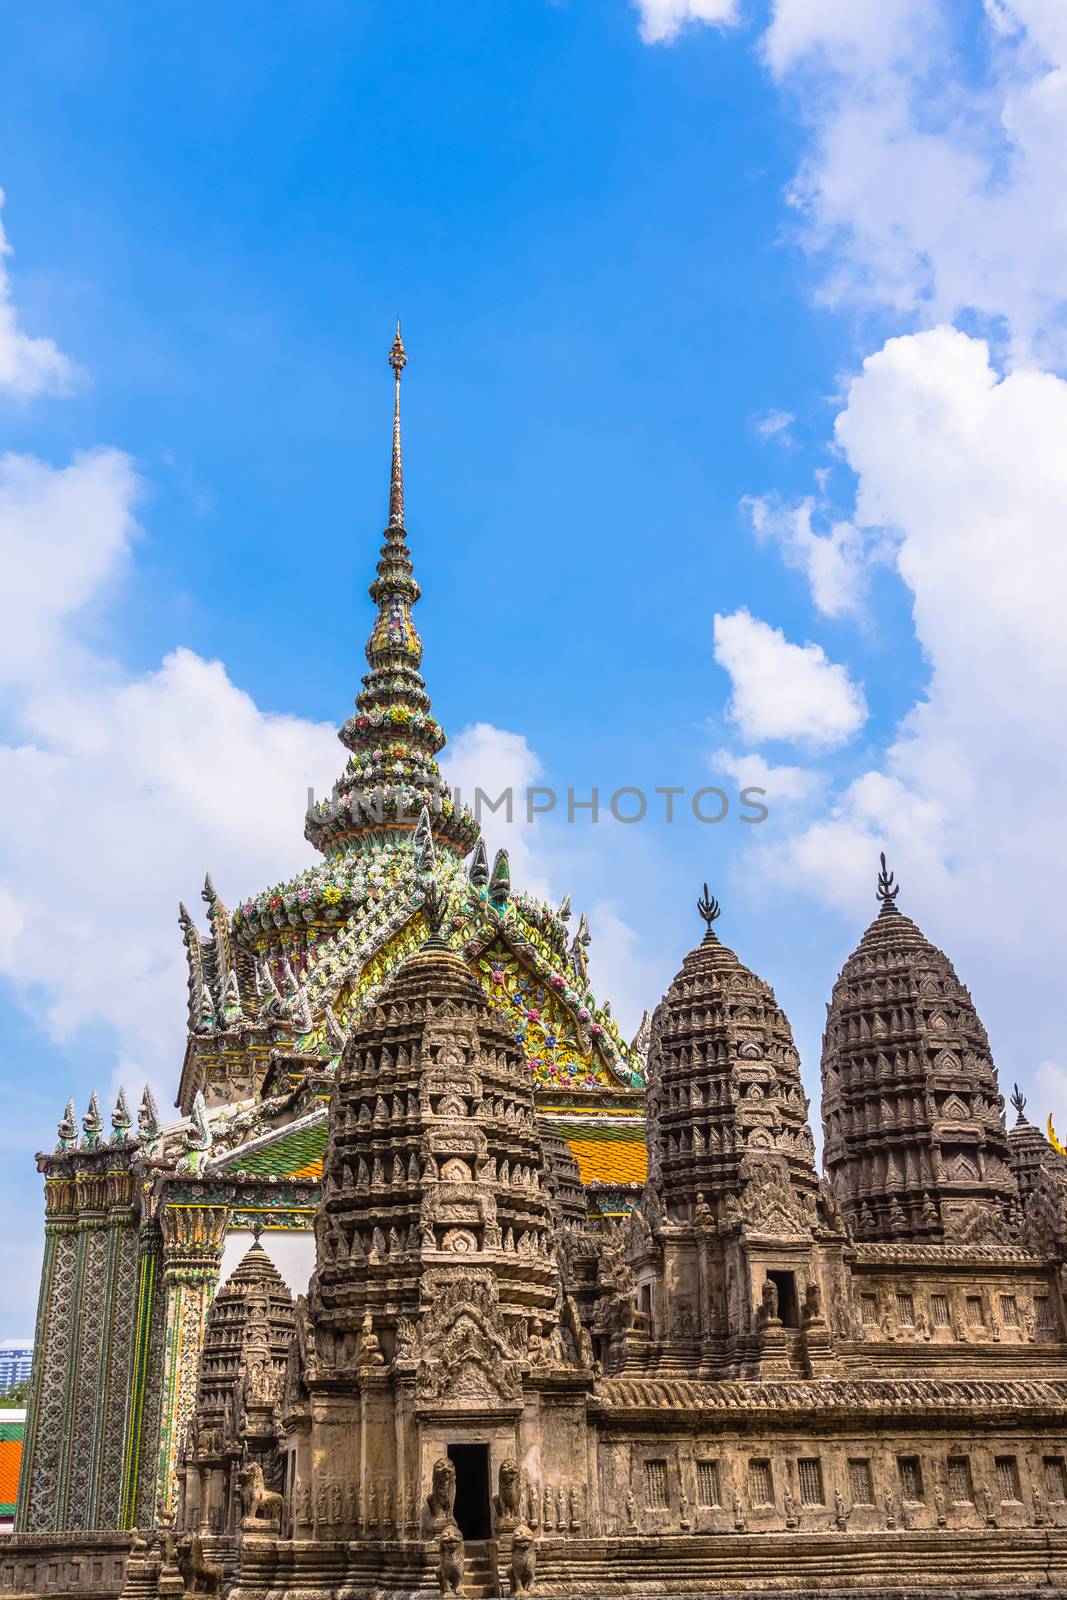 The Grand Palace complex in Bangkok, Thailand. In the foreground model of the Angkor Wat temple, the largest religious monument in the world located in Cambodia.